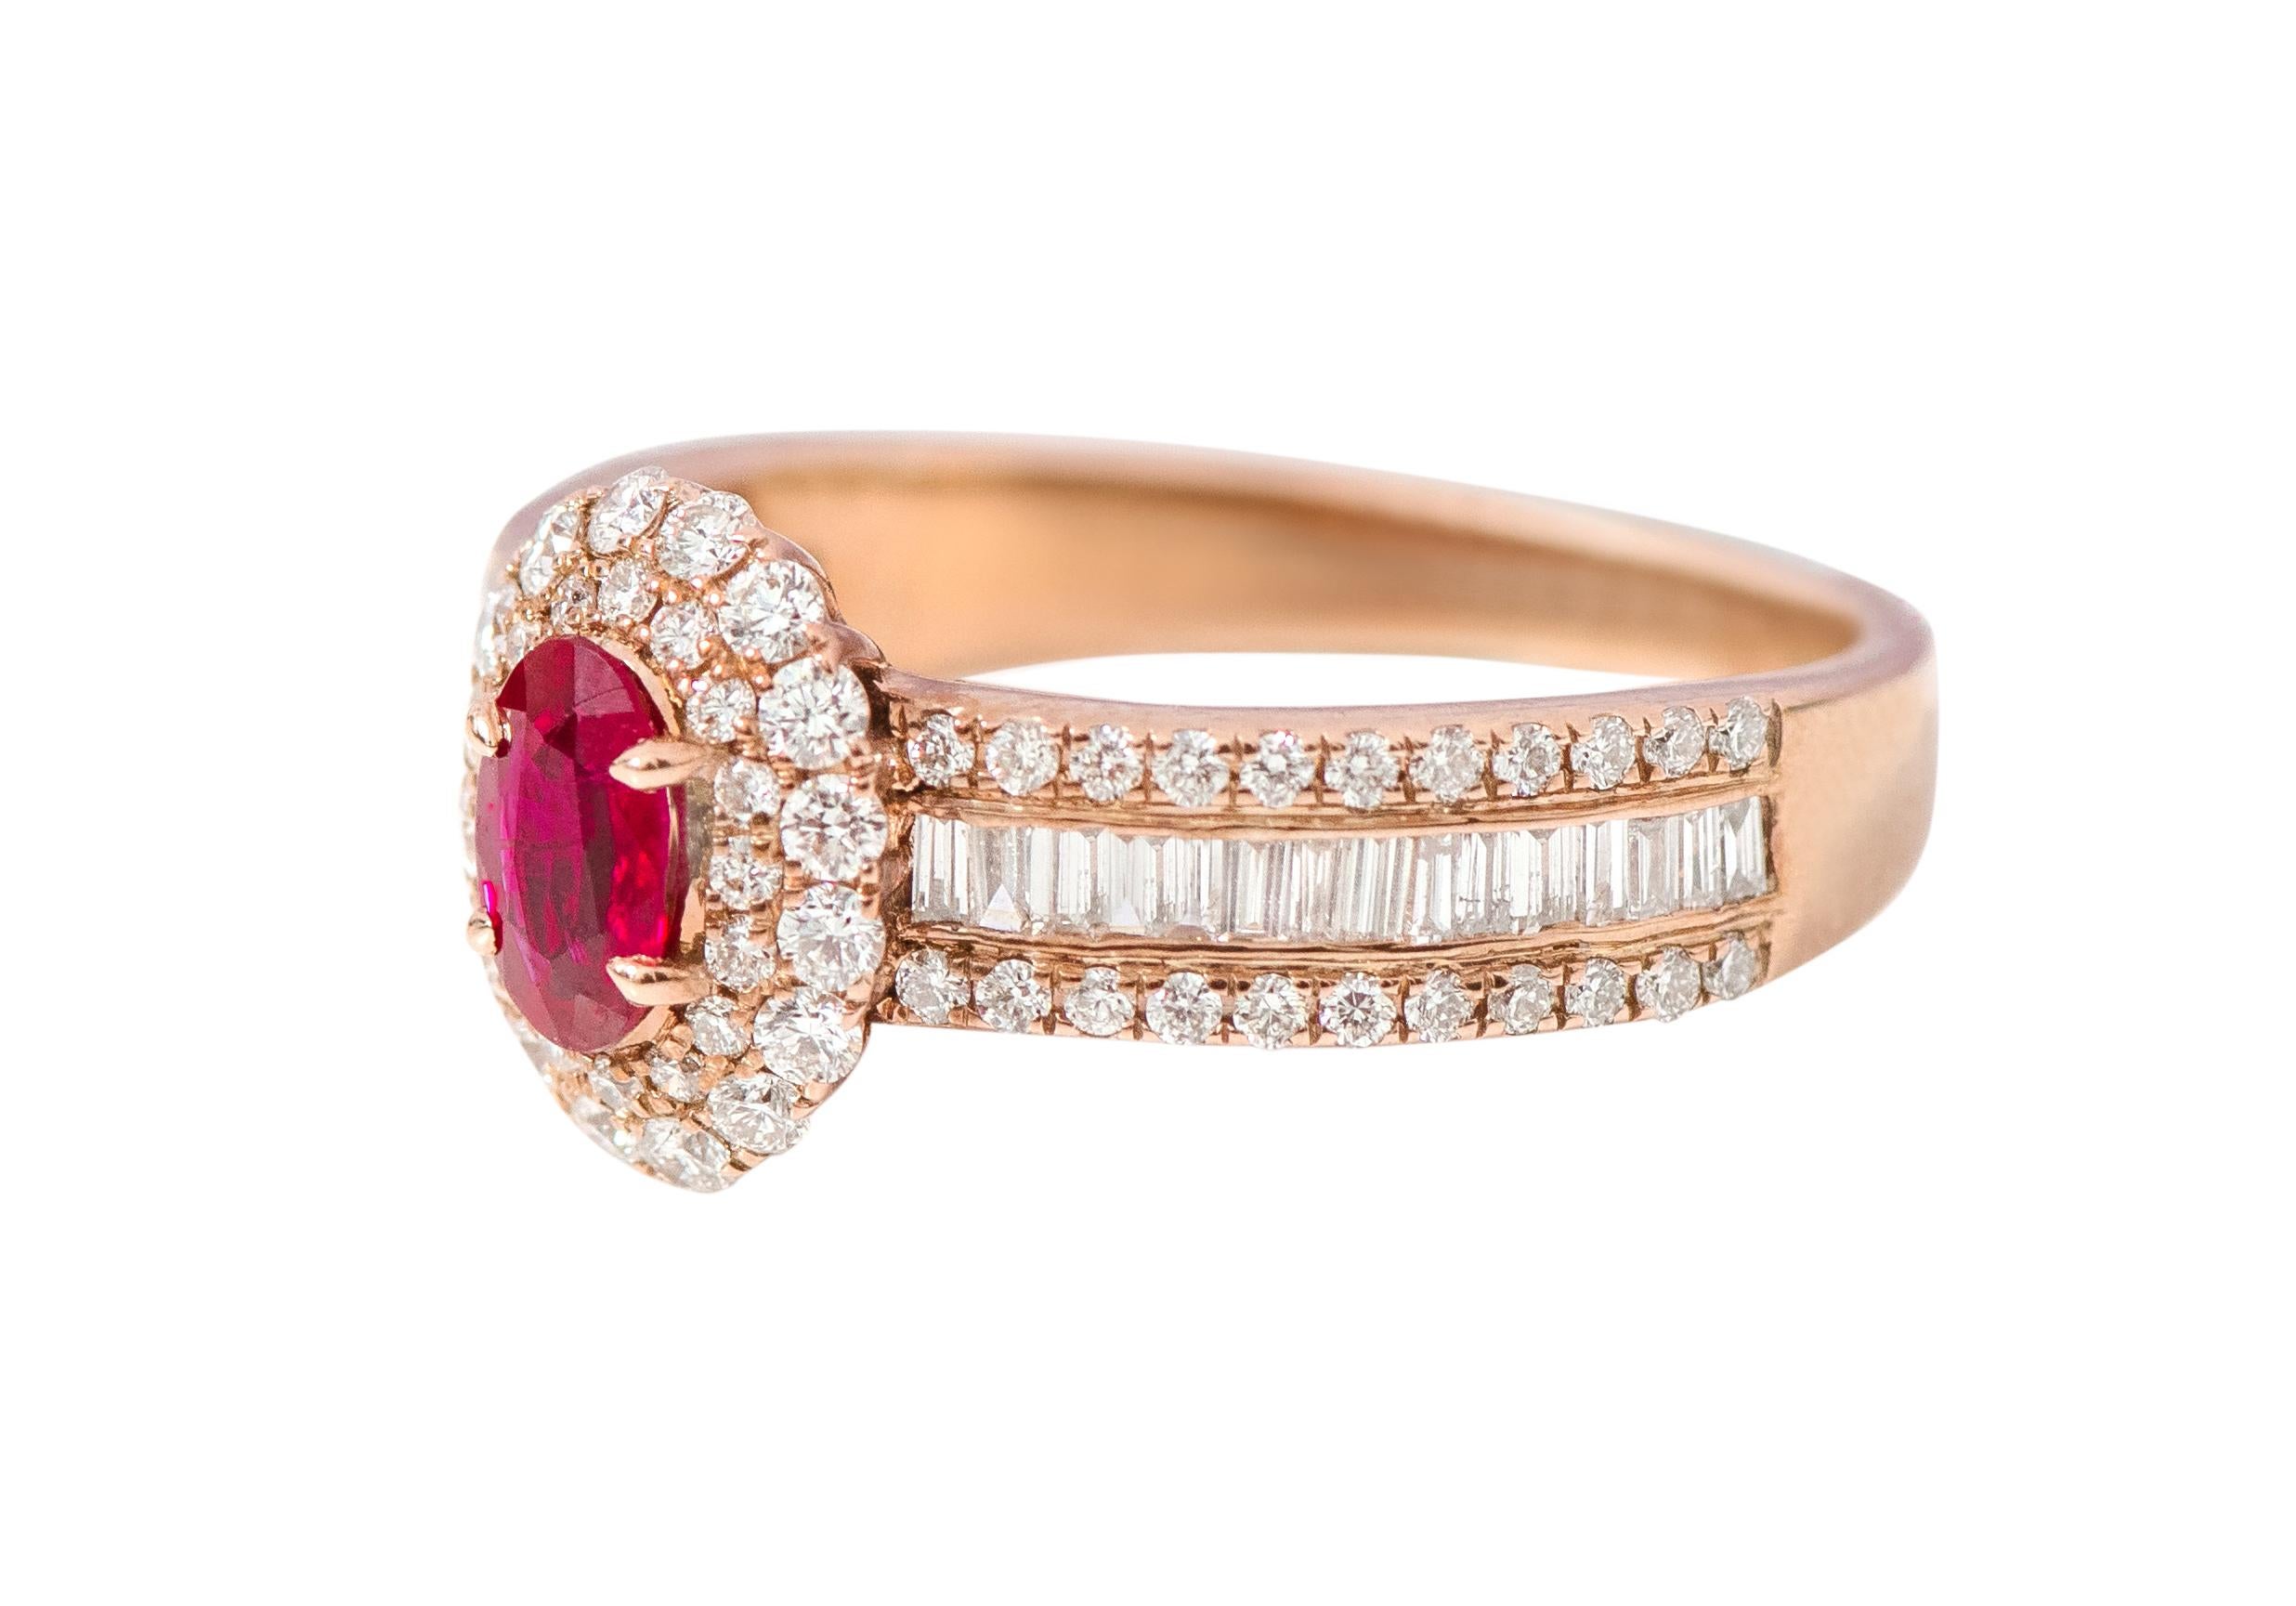 18 Karat Rose Gold Ruby and Diamond Double Cluster Band Ring

This enriching pigeon blood ruby oval and double cluster round diamond ring is mesmerizing. The vibrant oval ruby solitaire is firstly surrounded by a halo of small round diamonds and